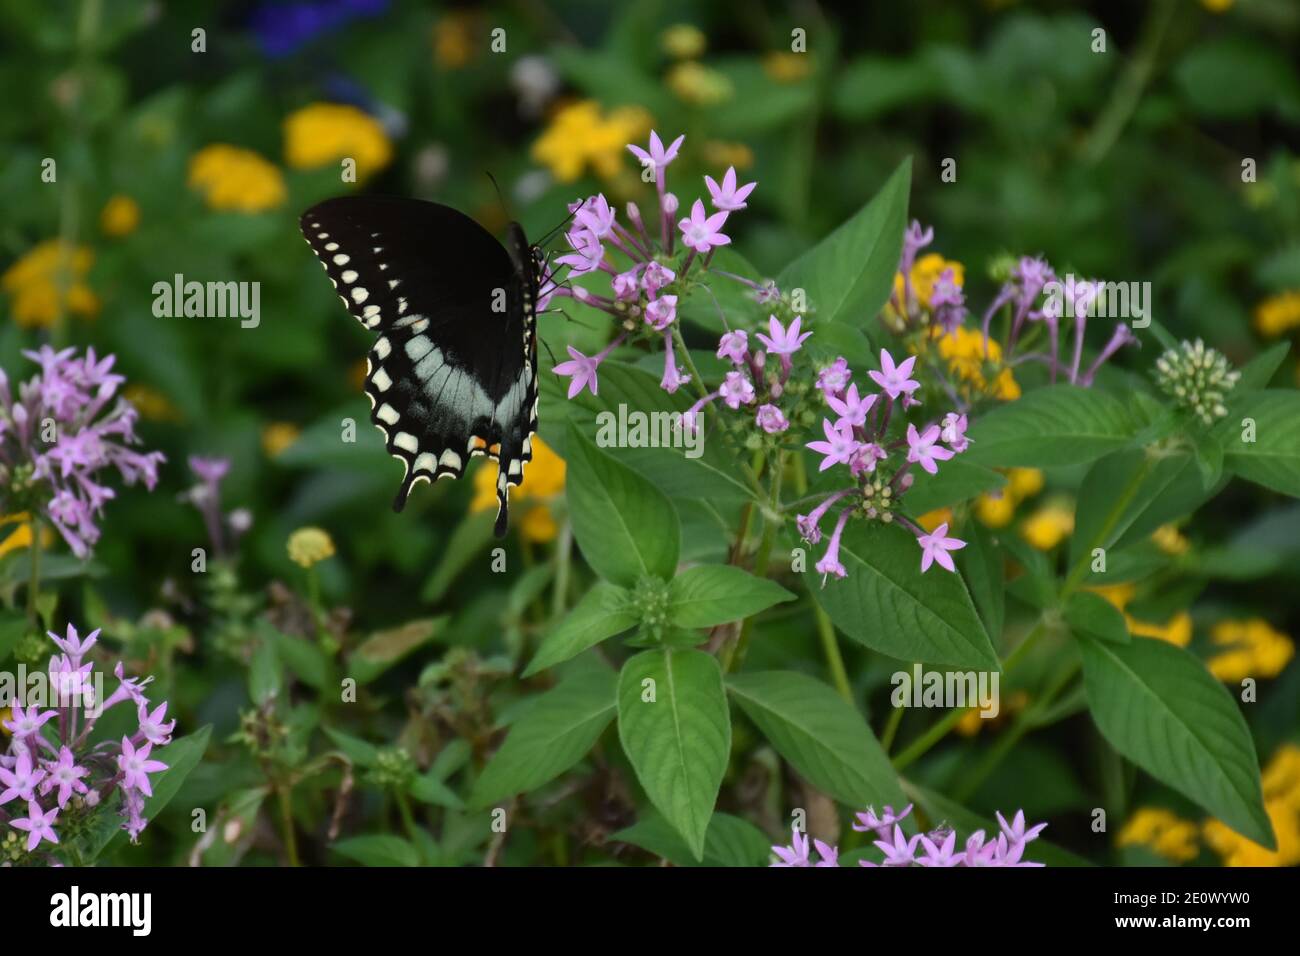 I created this macro-Picture of a Butterfly on a flower or Butterflies on a flower to practice my macro photography skills. Butterflies are important Stock Photo